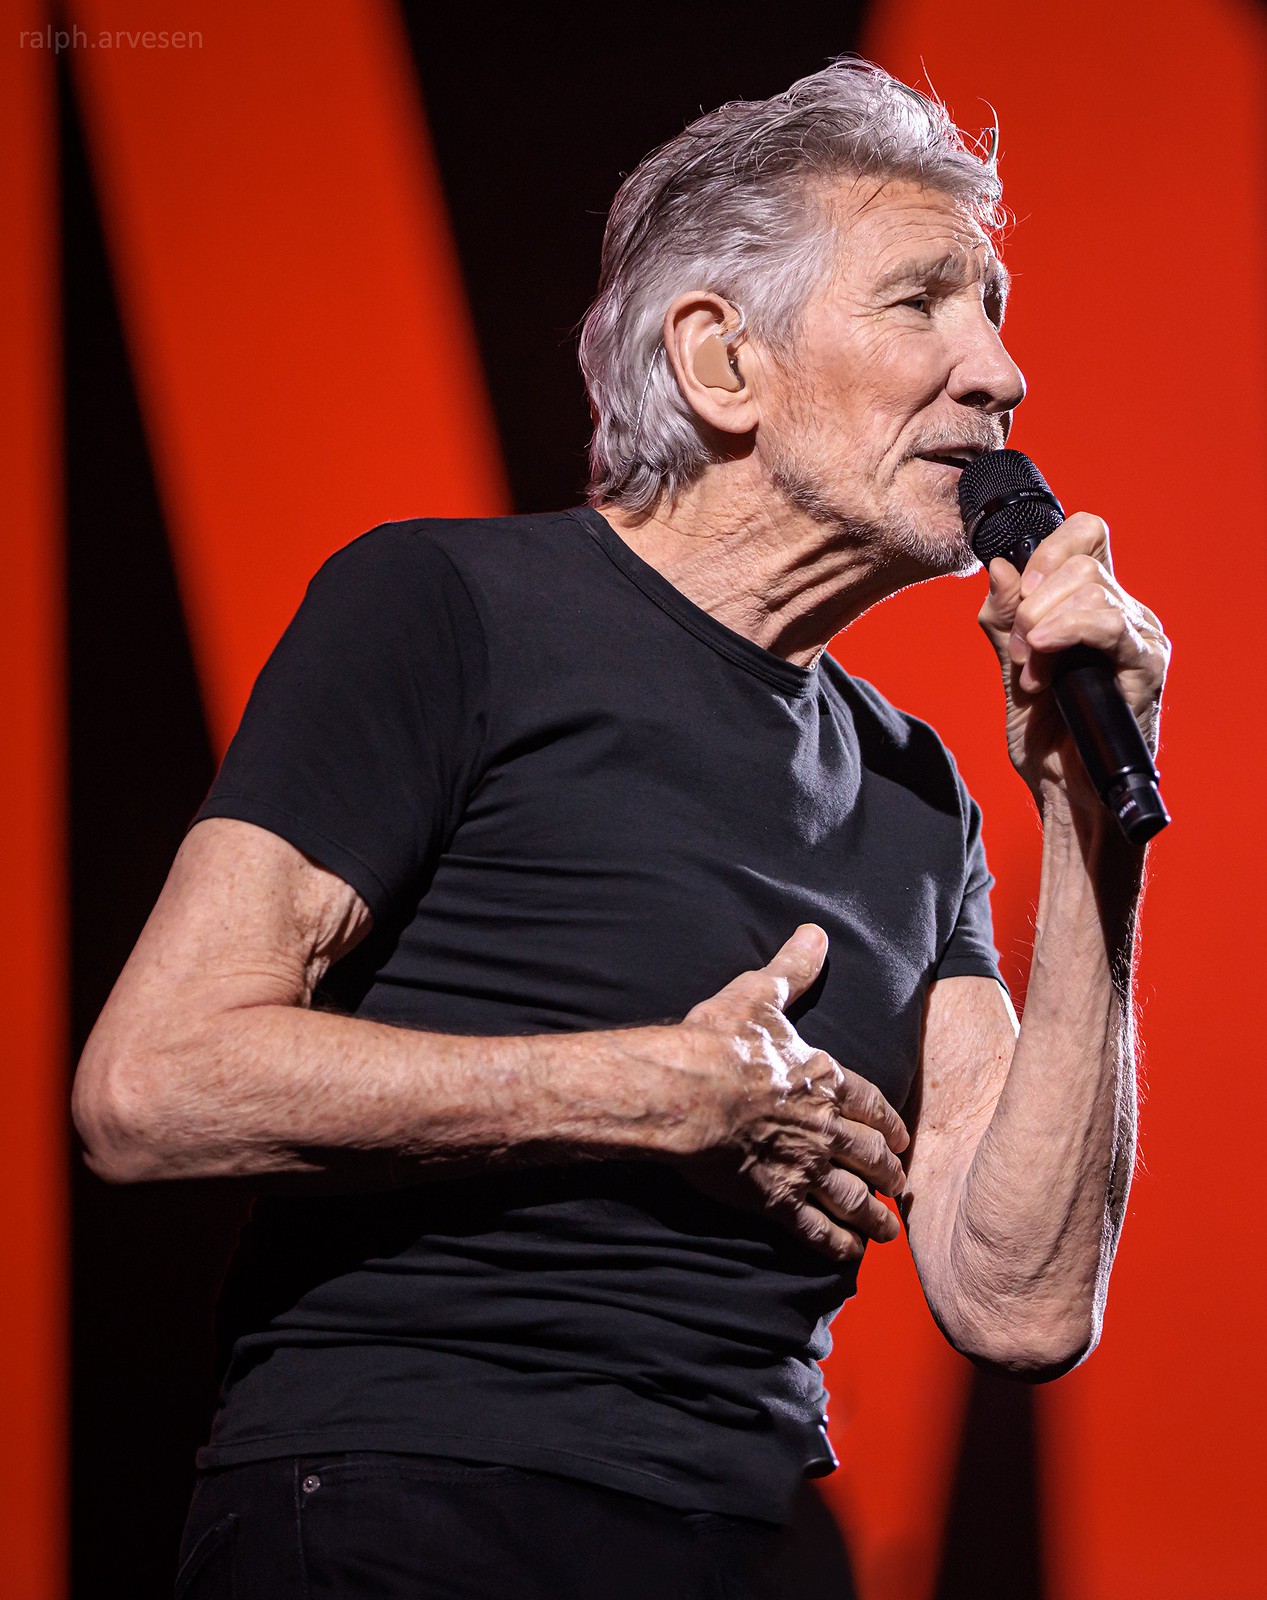 Roger Waters | Texas Review | Ralph Arvesen